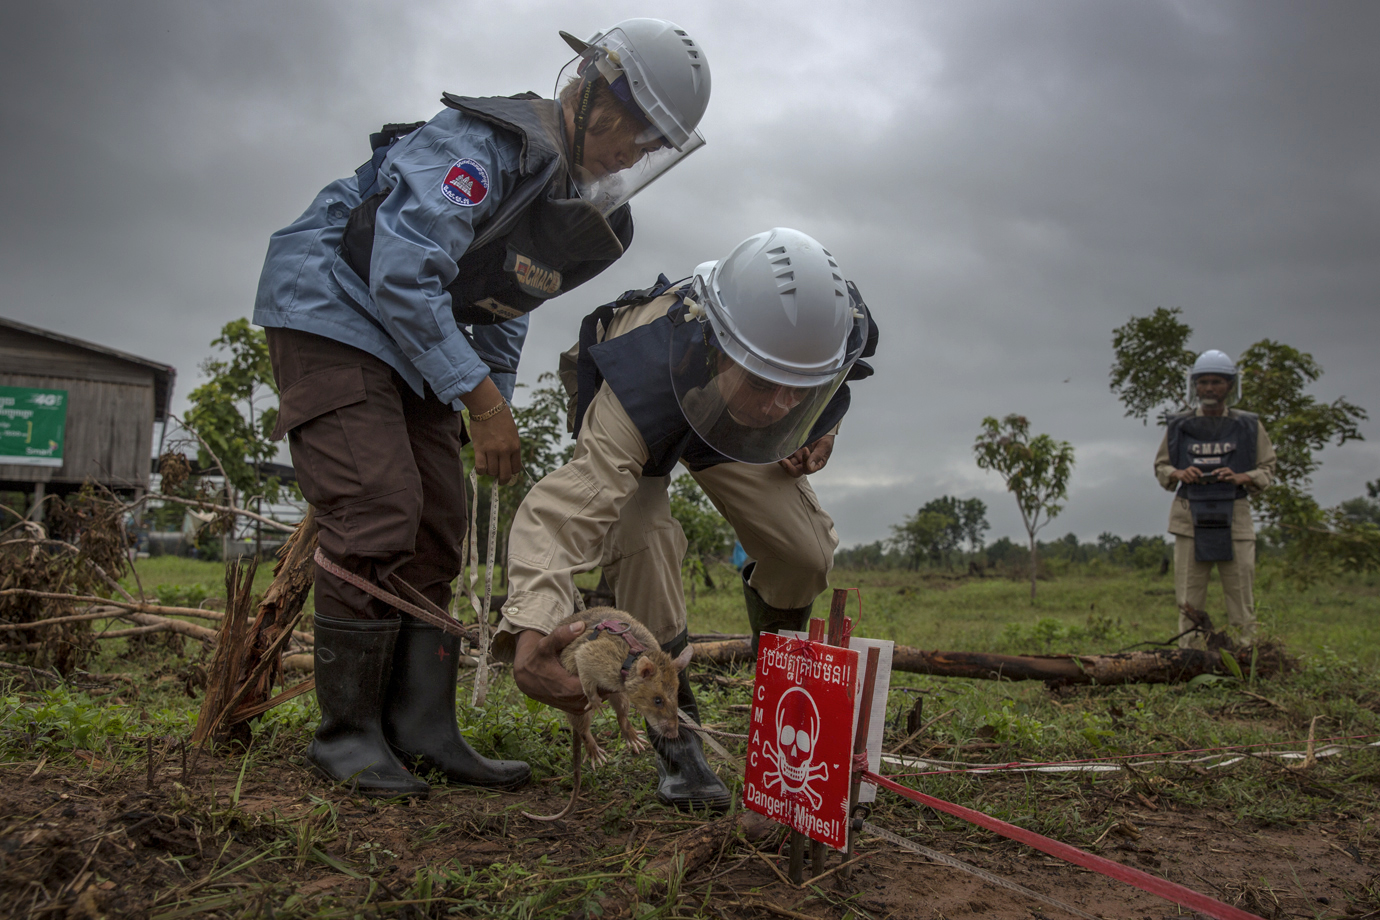  A rat is locating land mines / Cambodia - 2016 